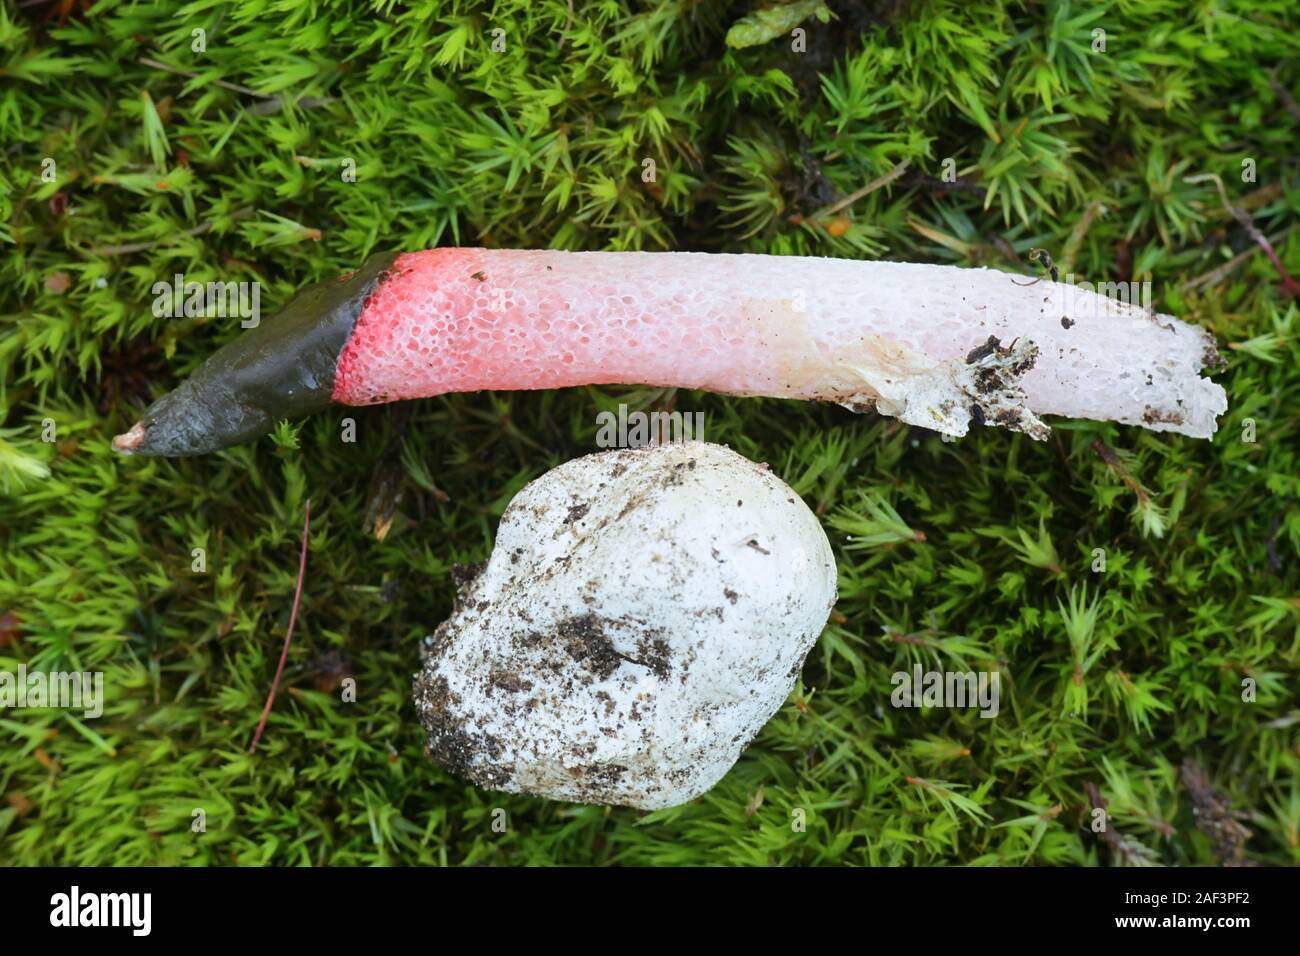 Mutinus ravenelii, known as the red stinkhorn fungus, egg and mature specimen from Finland Stock Photo